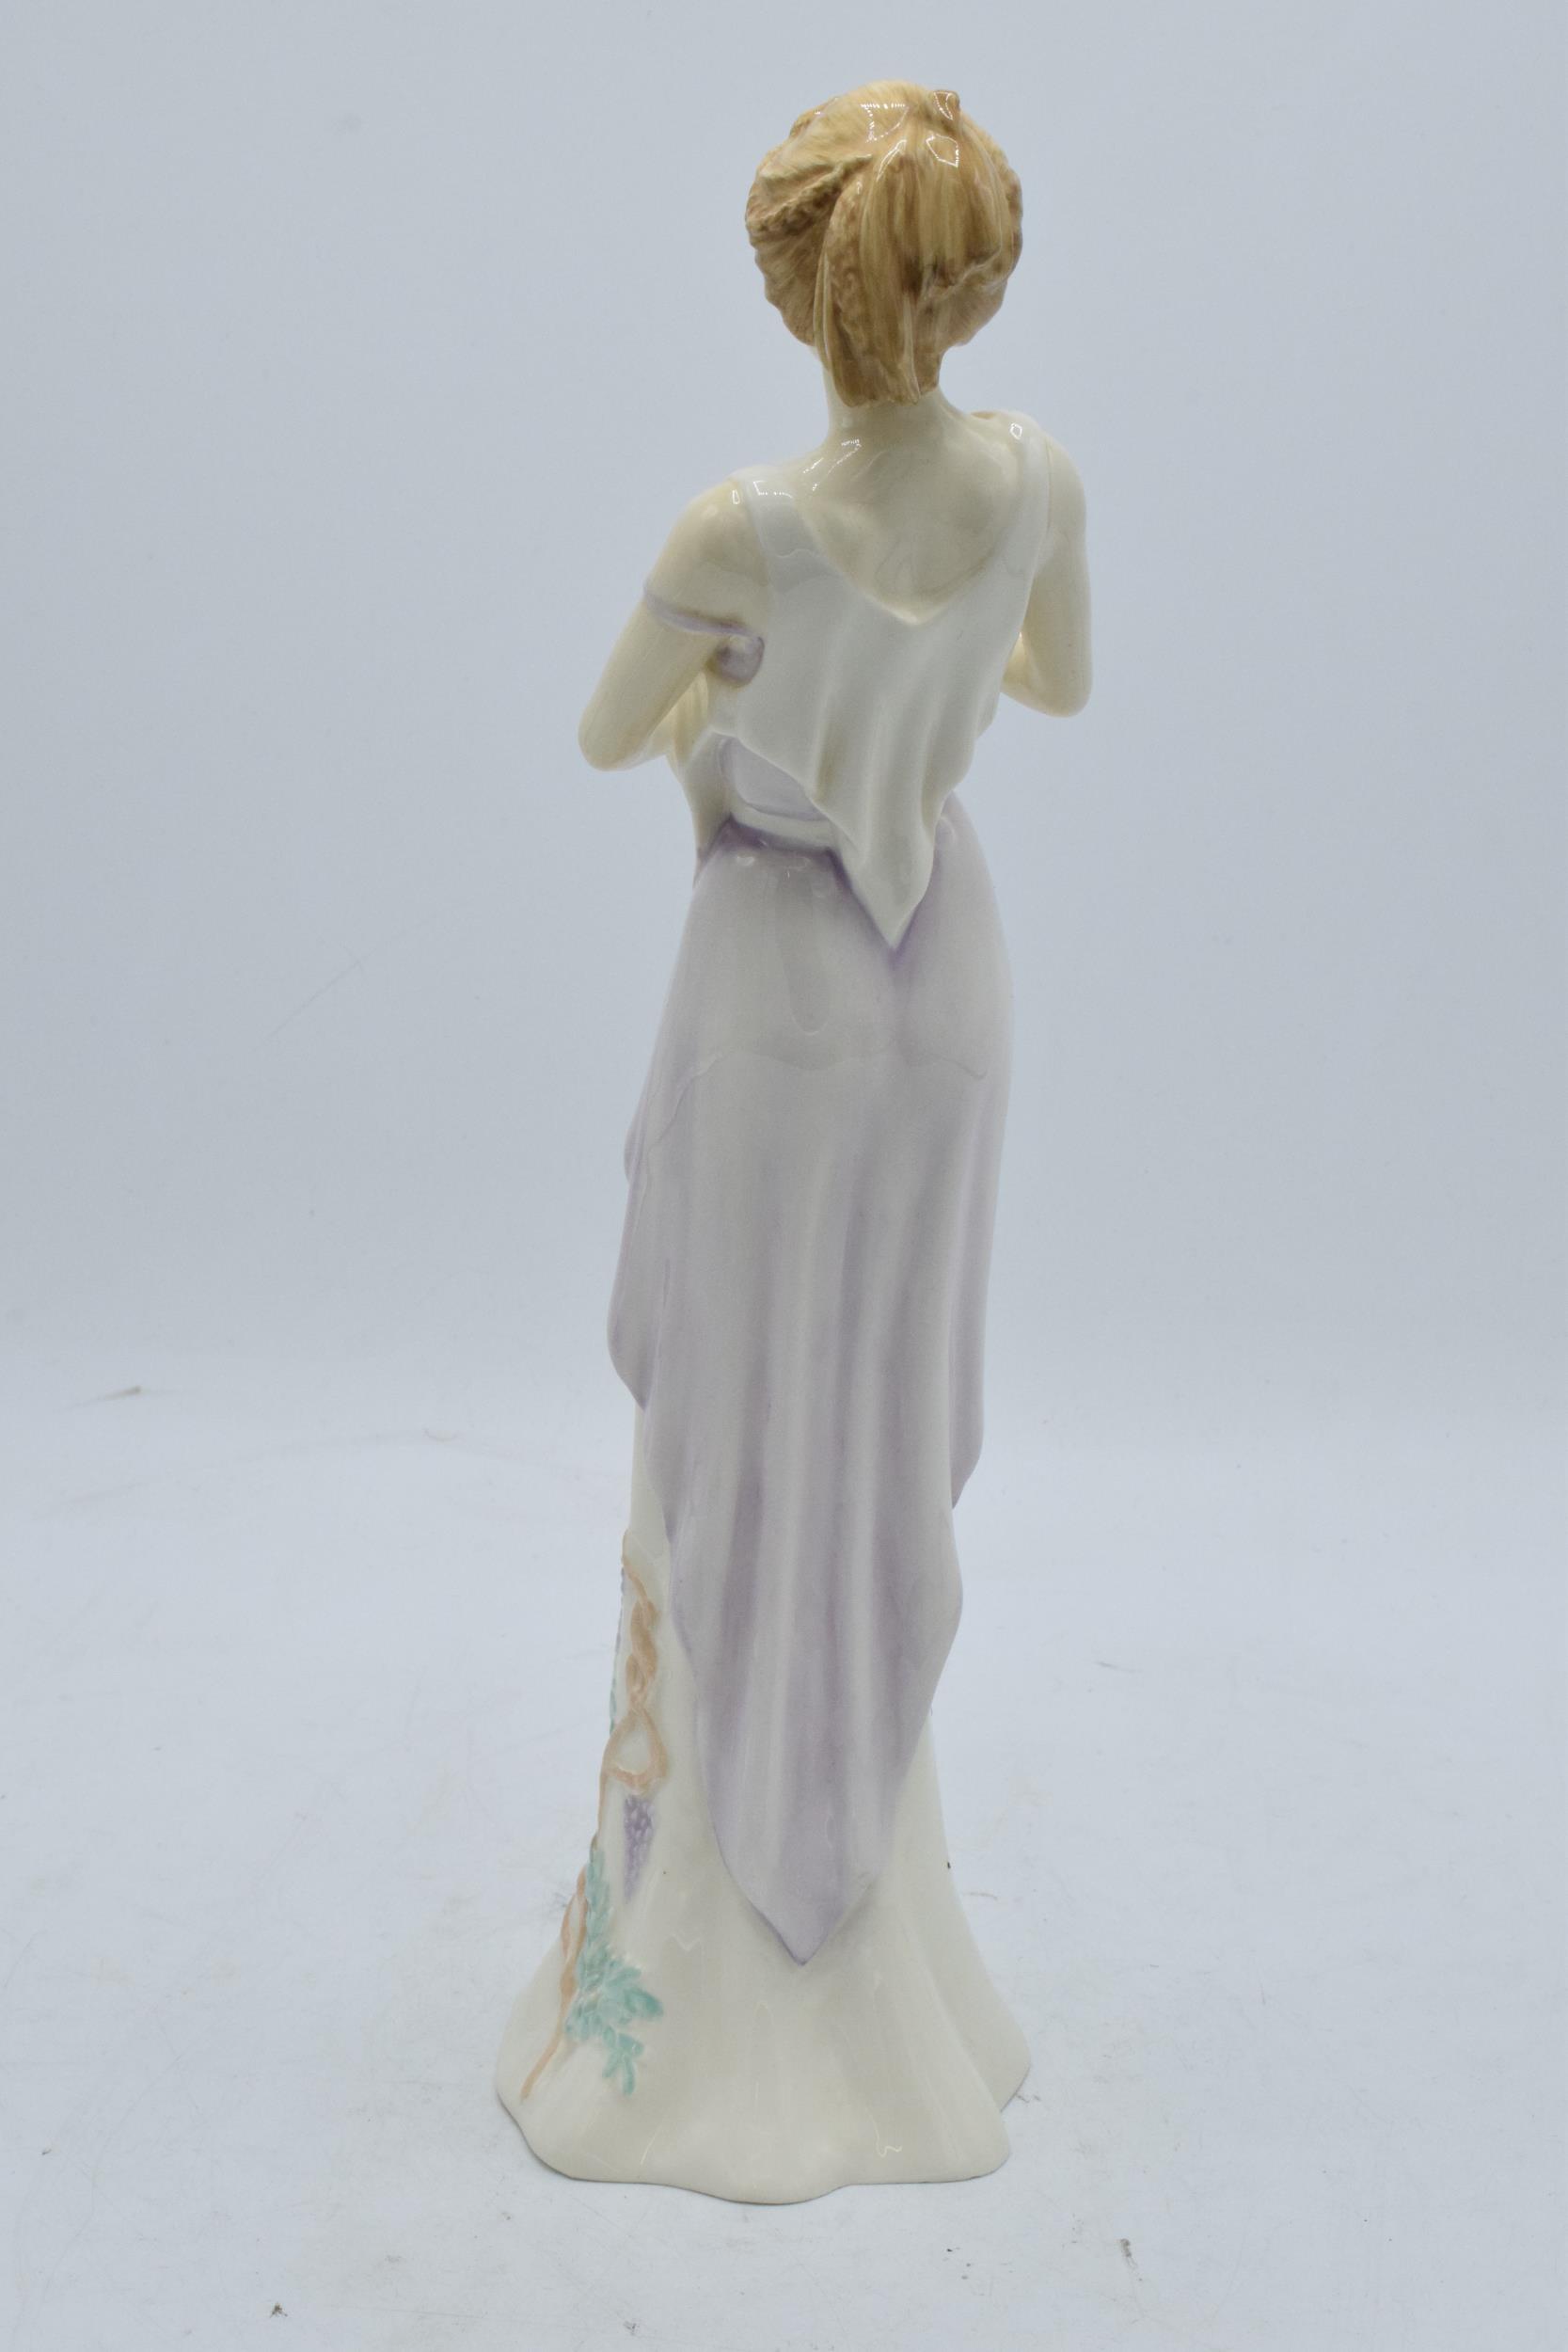 Royal Doulton Impressions figure Summer Blooms HN4194. In good condition with no obvious damage or - Image 2 of 3